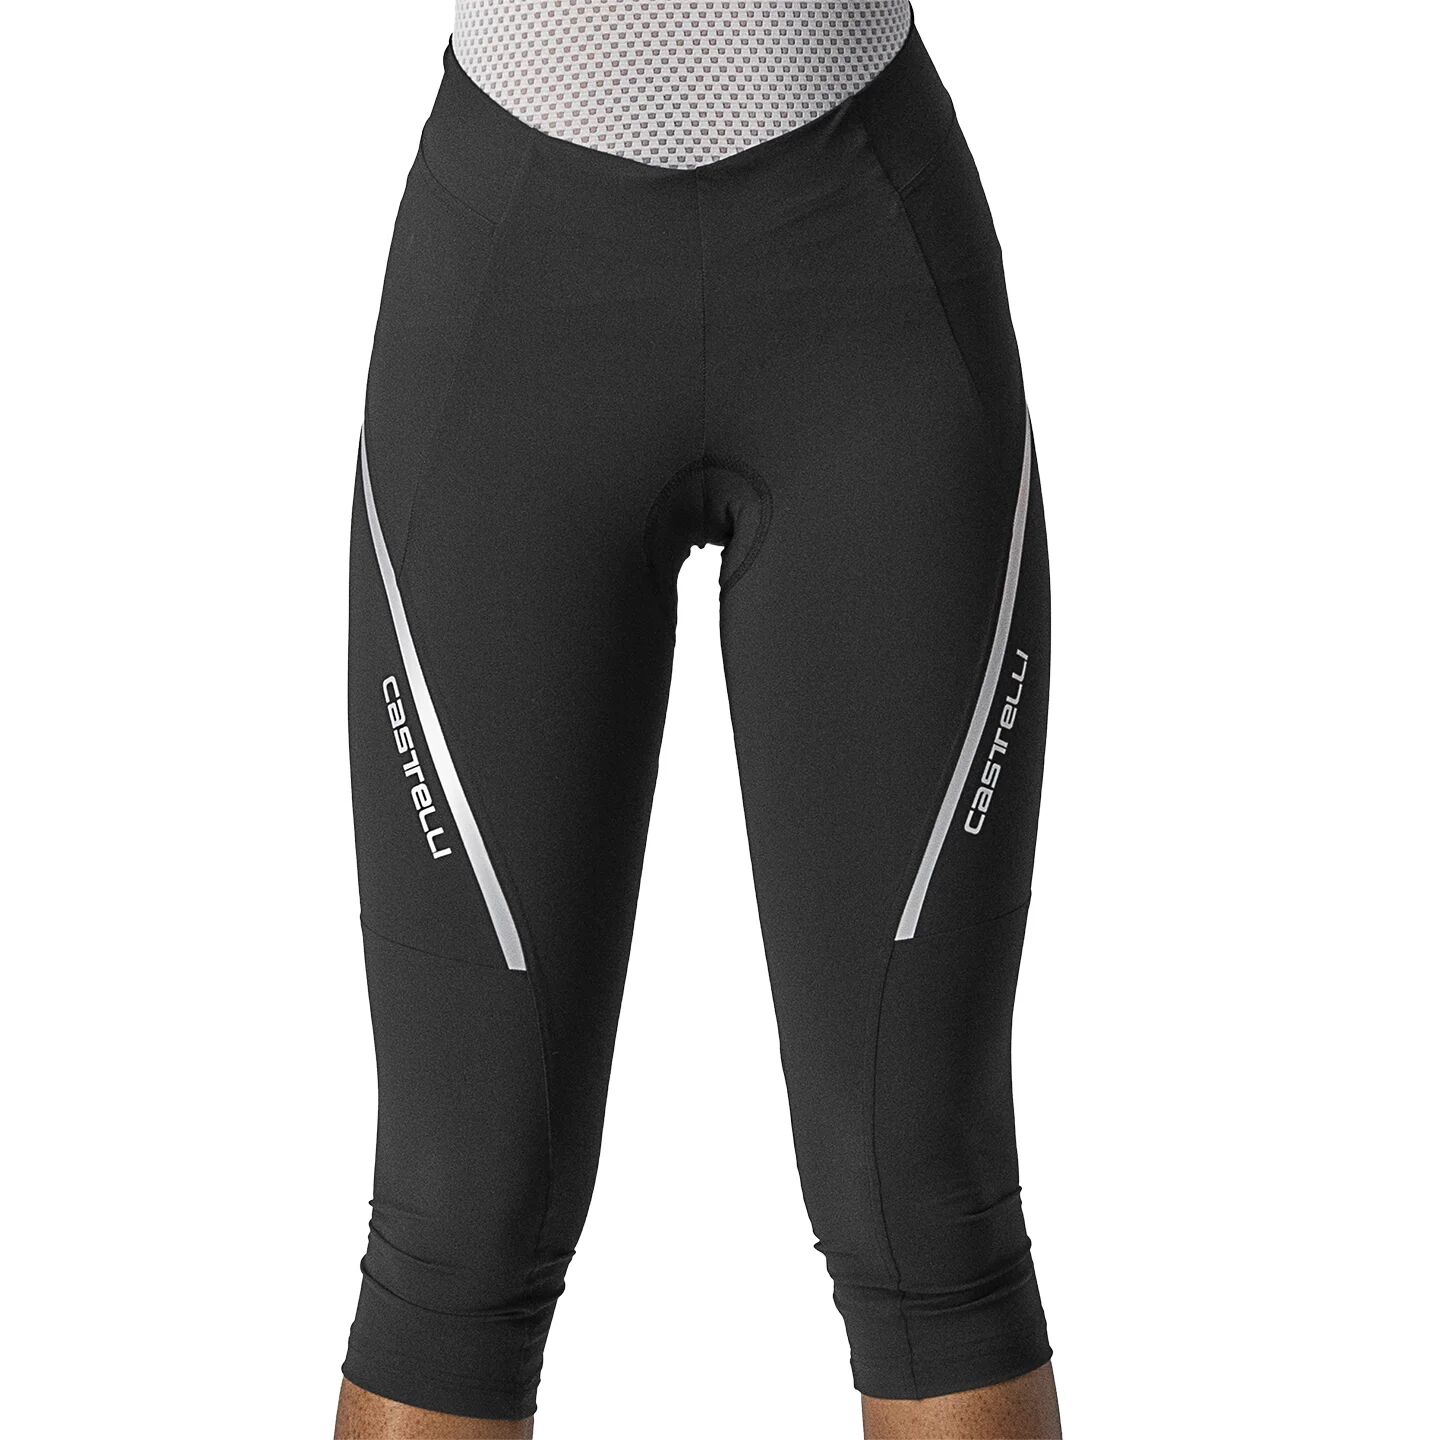 Castelli Velocissima 3 Women's Knickers Women's Knickers, size S, Cycle trousers, Cycle clothing